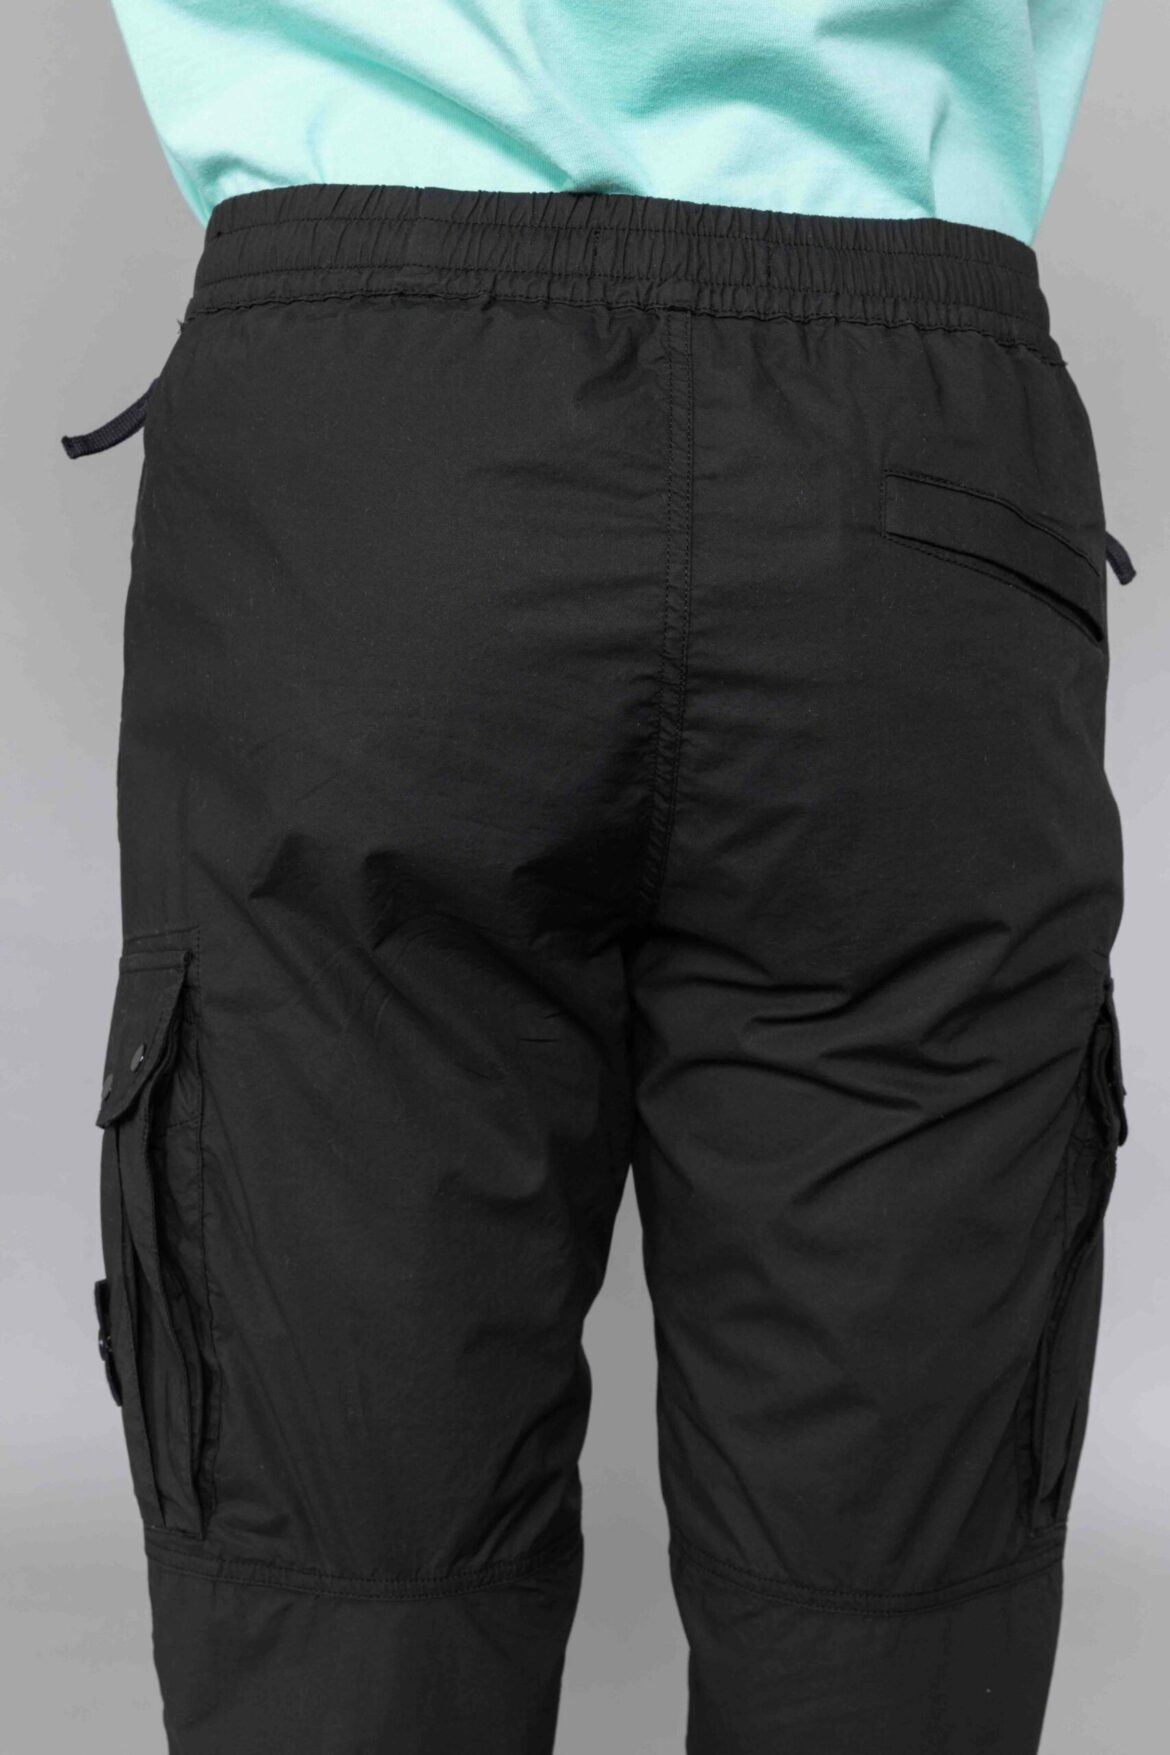 Stone Island Cargo Trousers outlet - Men - 1800 products on sale |  FASHIOLA.co.uk